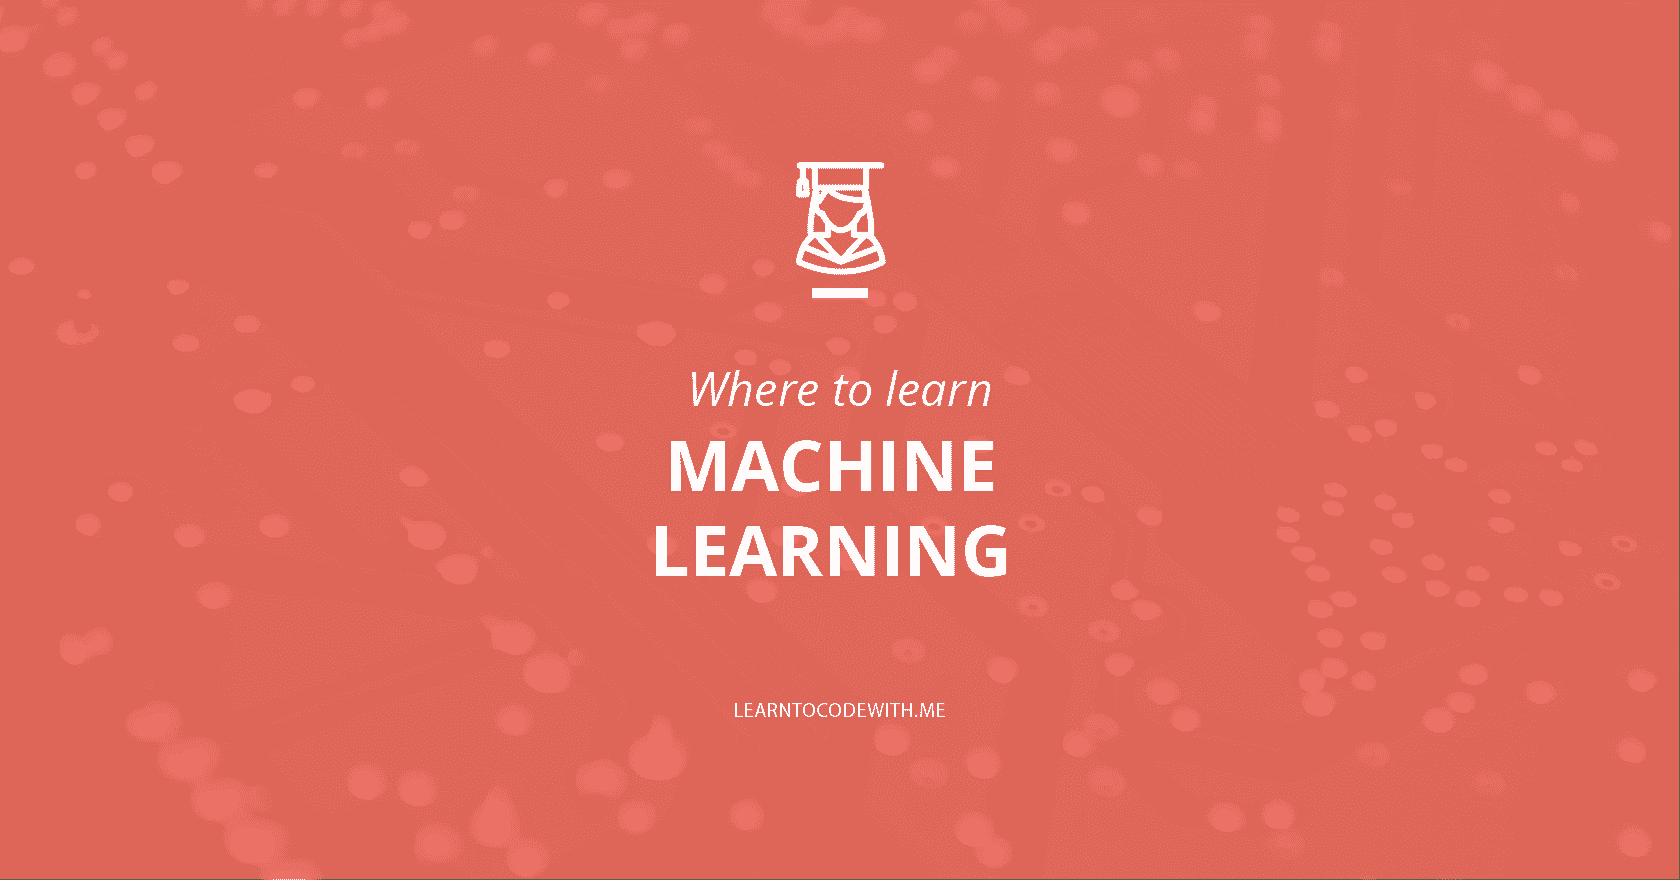 Where to learn machine learning